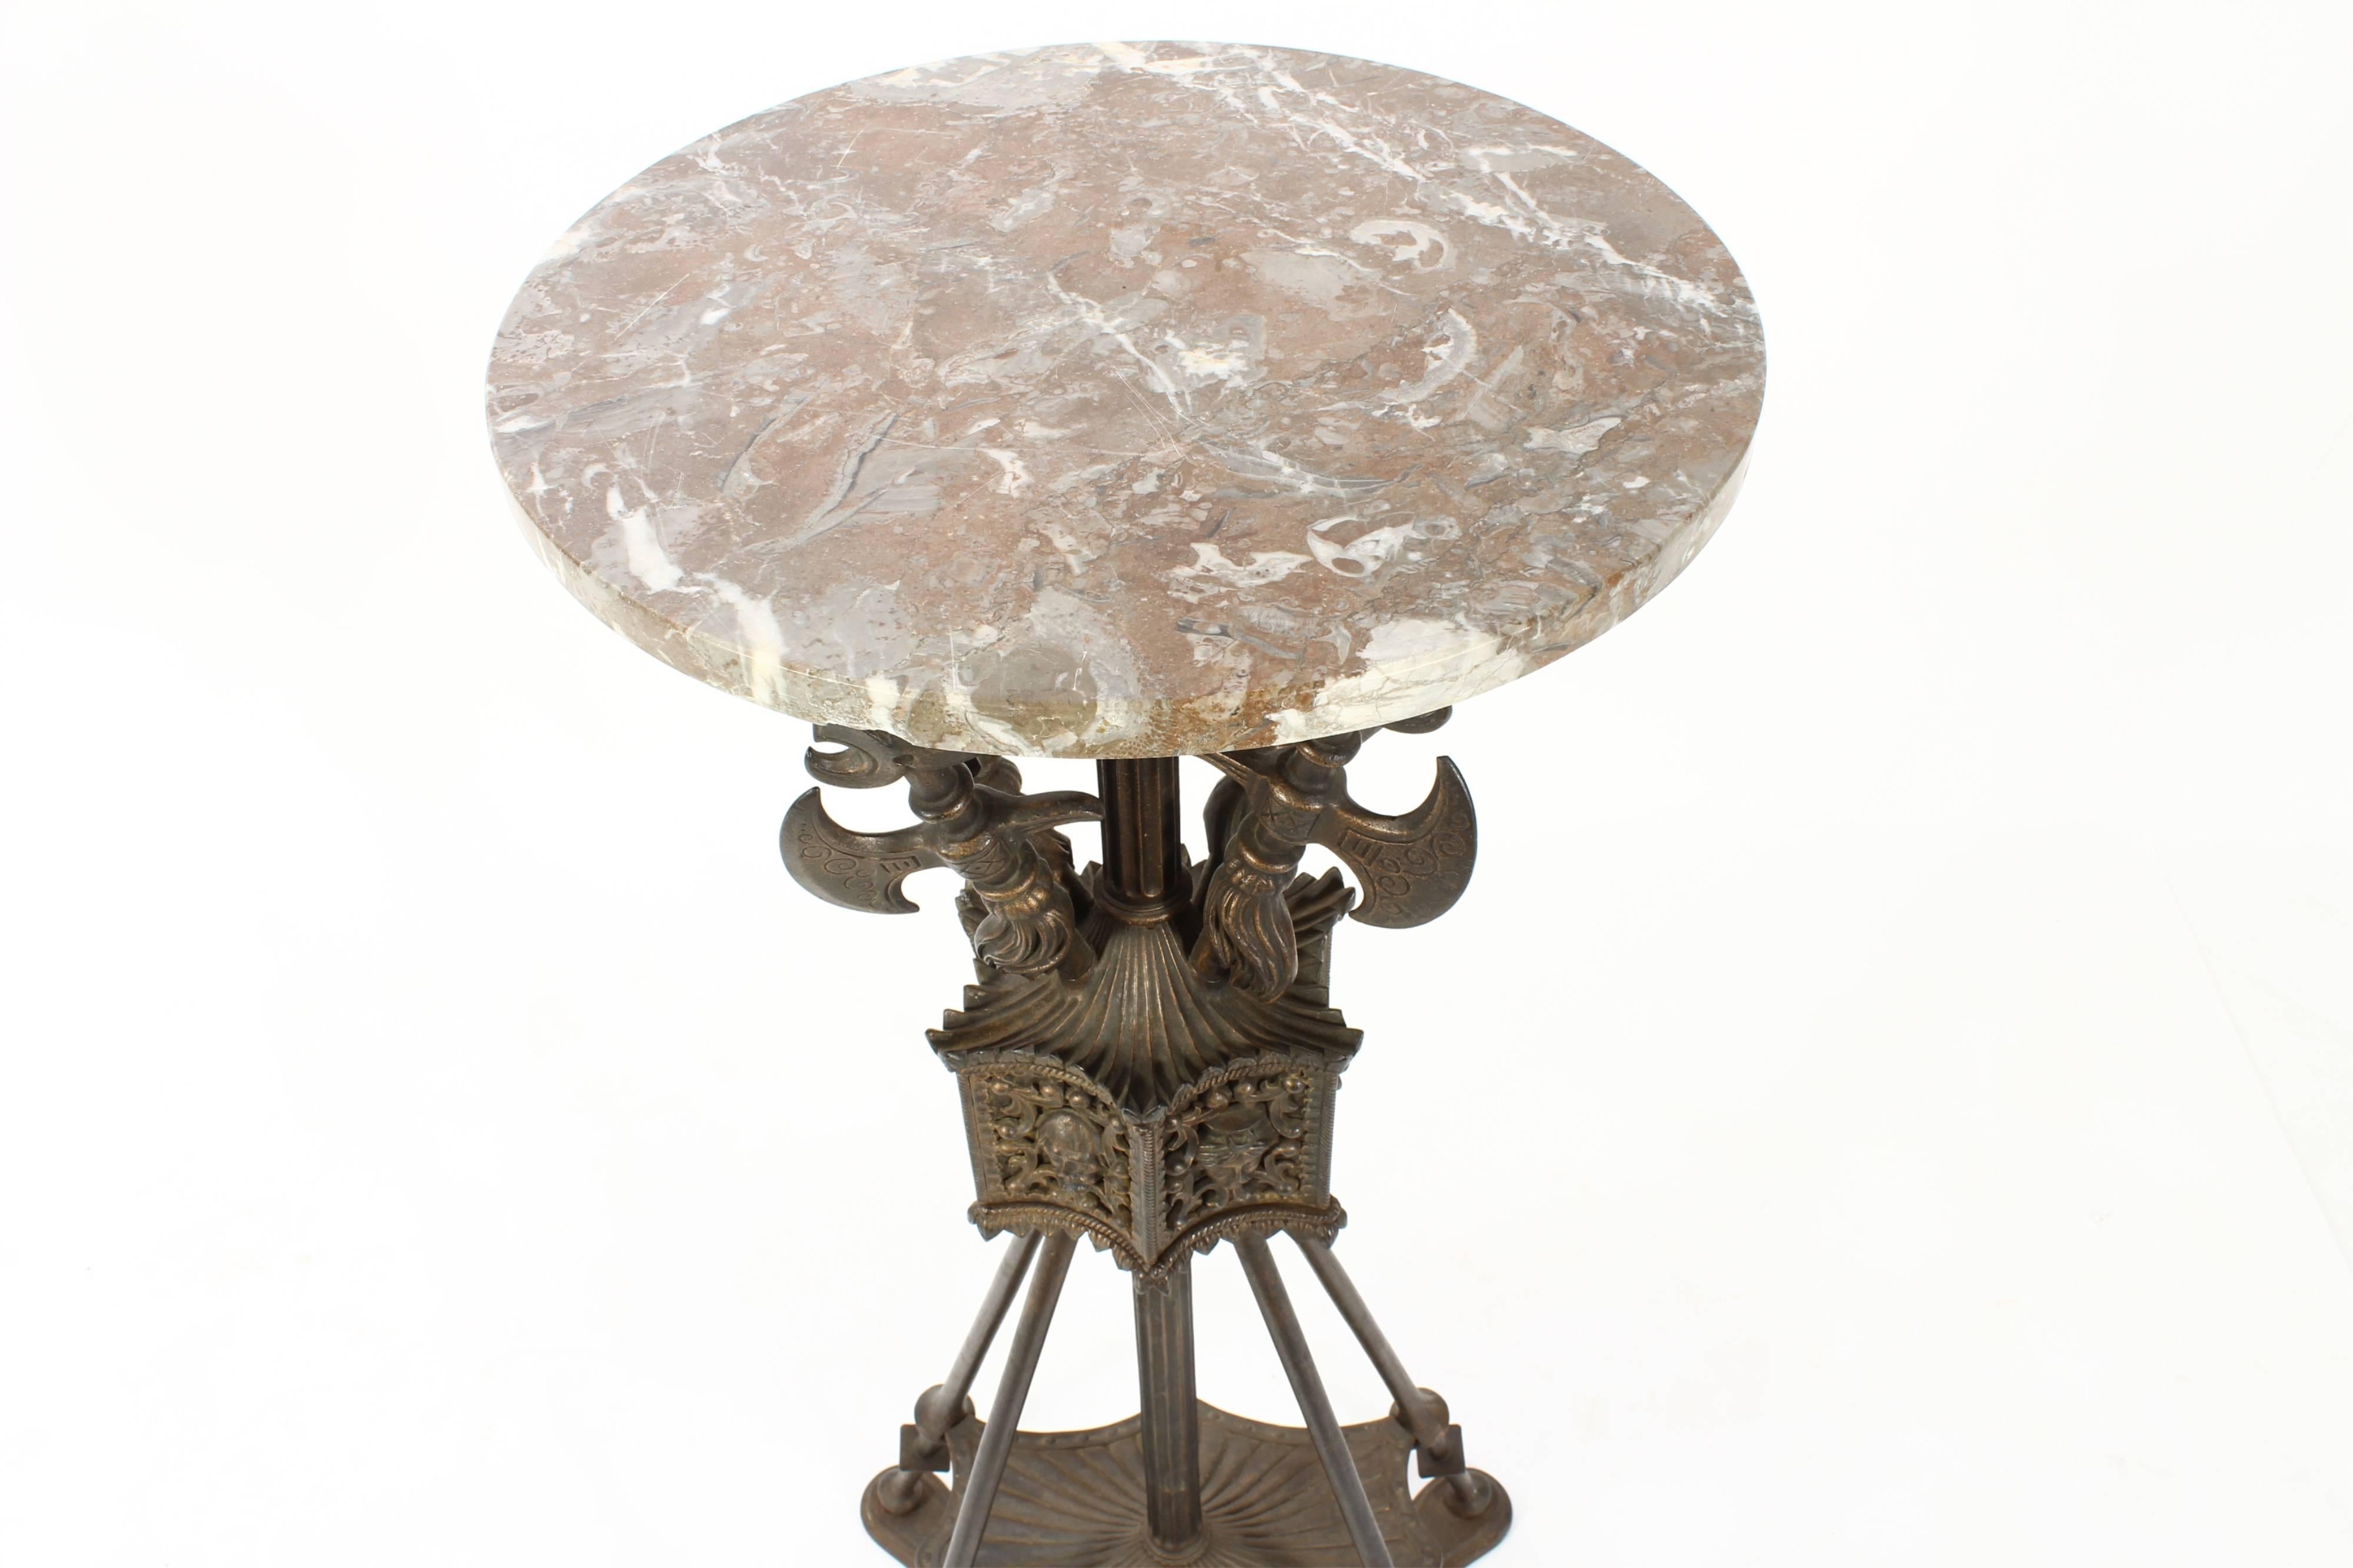 French Empire style metal and marble pedestal with fleur de lis, sword and shield motif. This piece is from the Cascone Collection of Arts and Antiques - New Jersey.